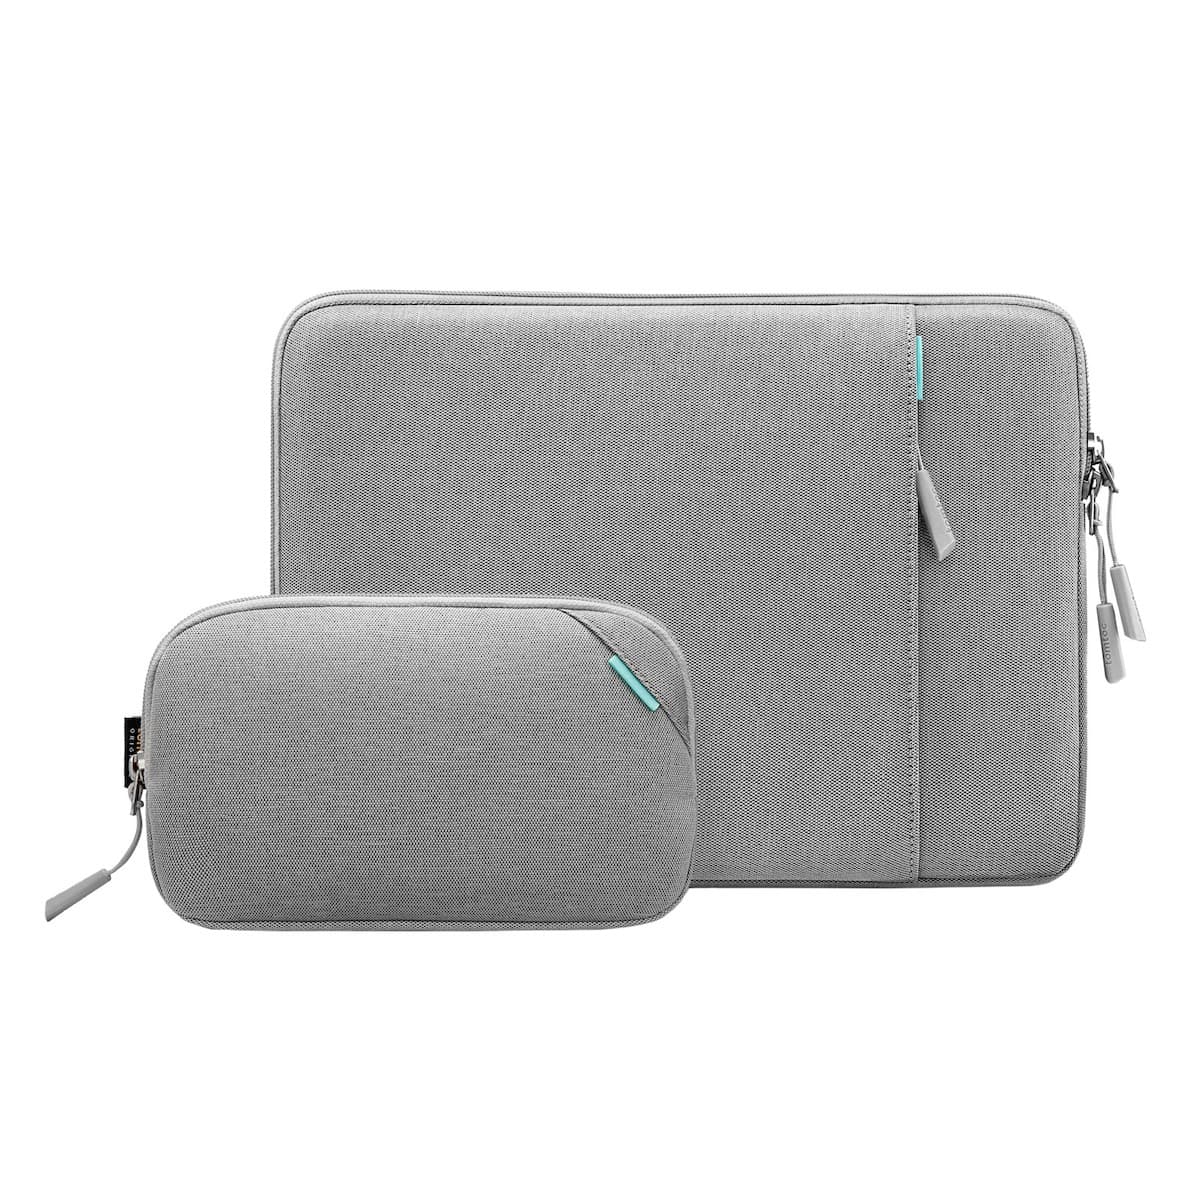 primary_Defender-A13 Laptop Sleeve Kit For 16